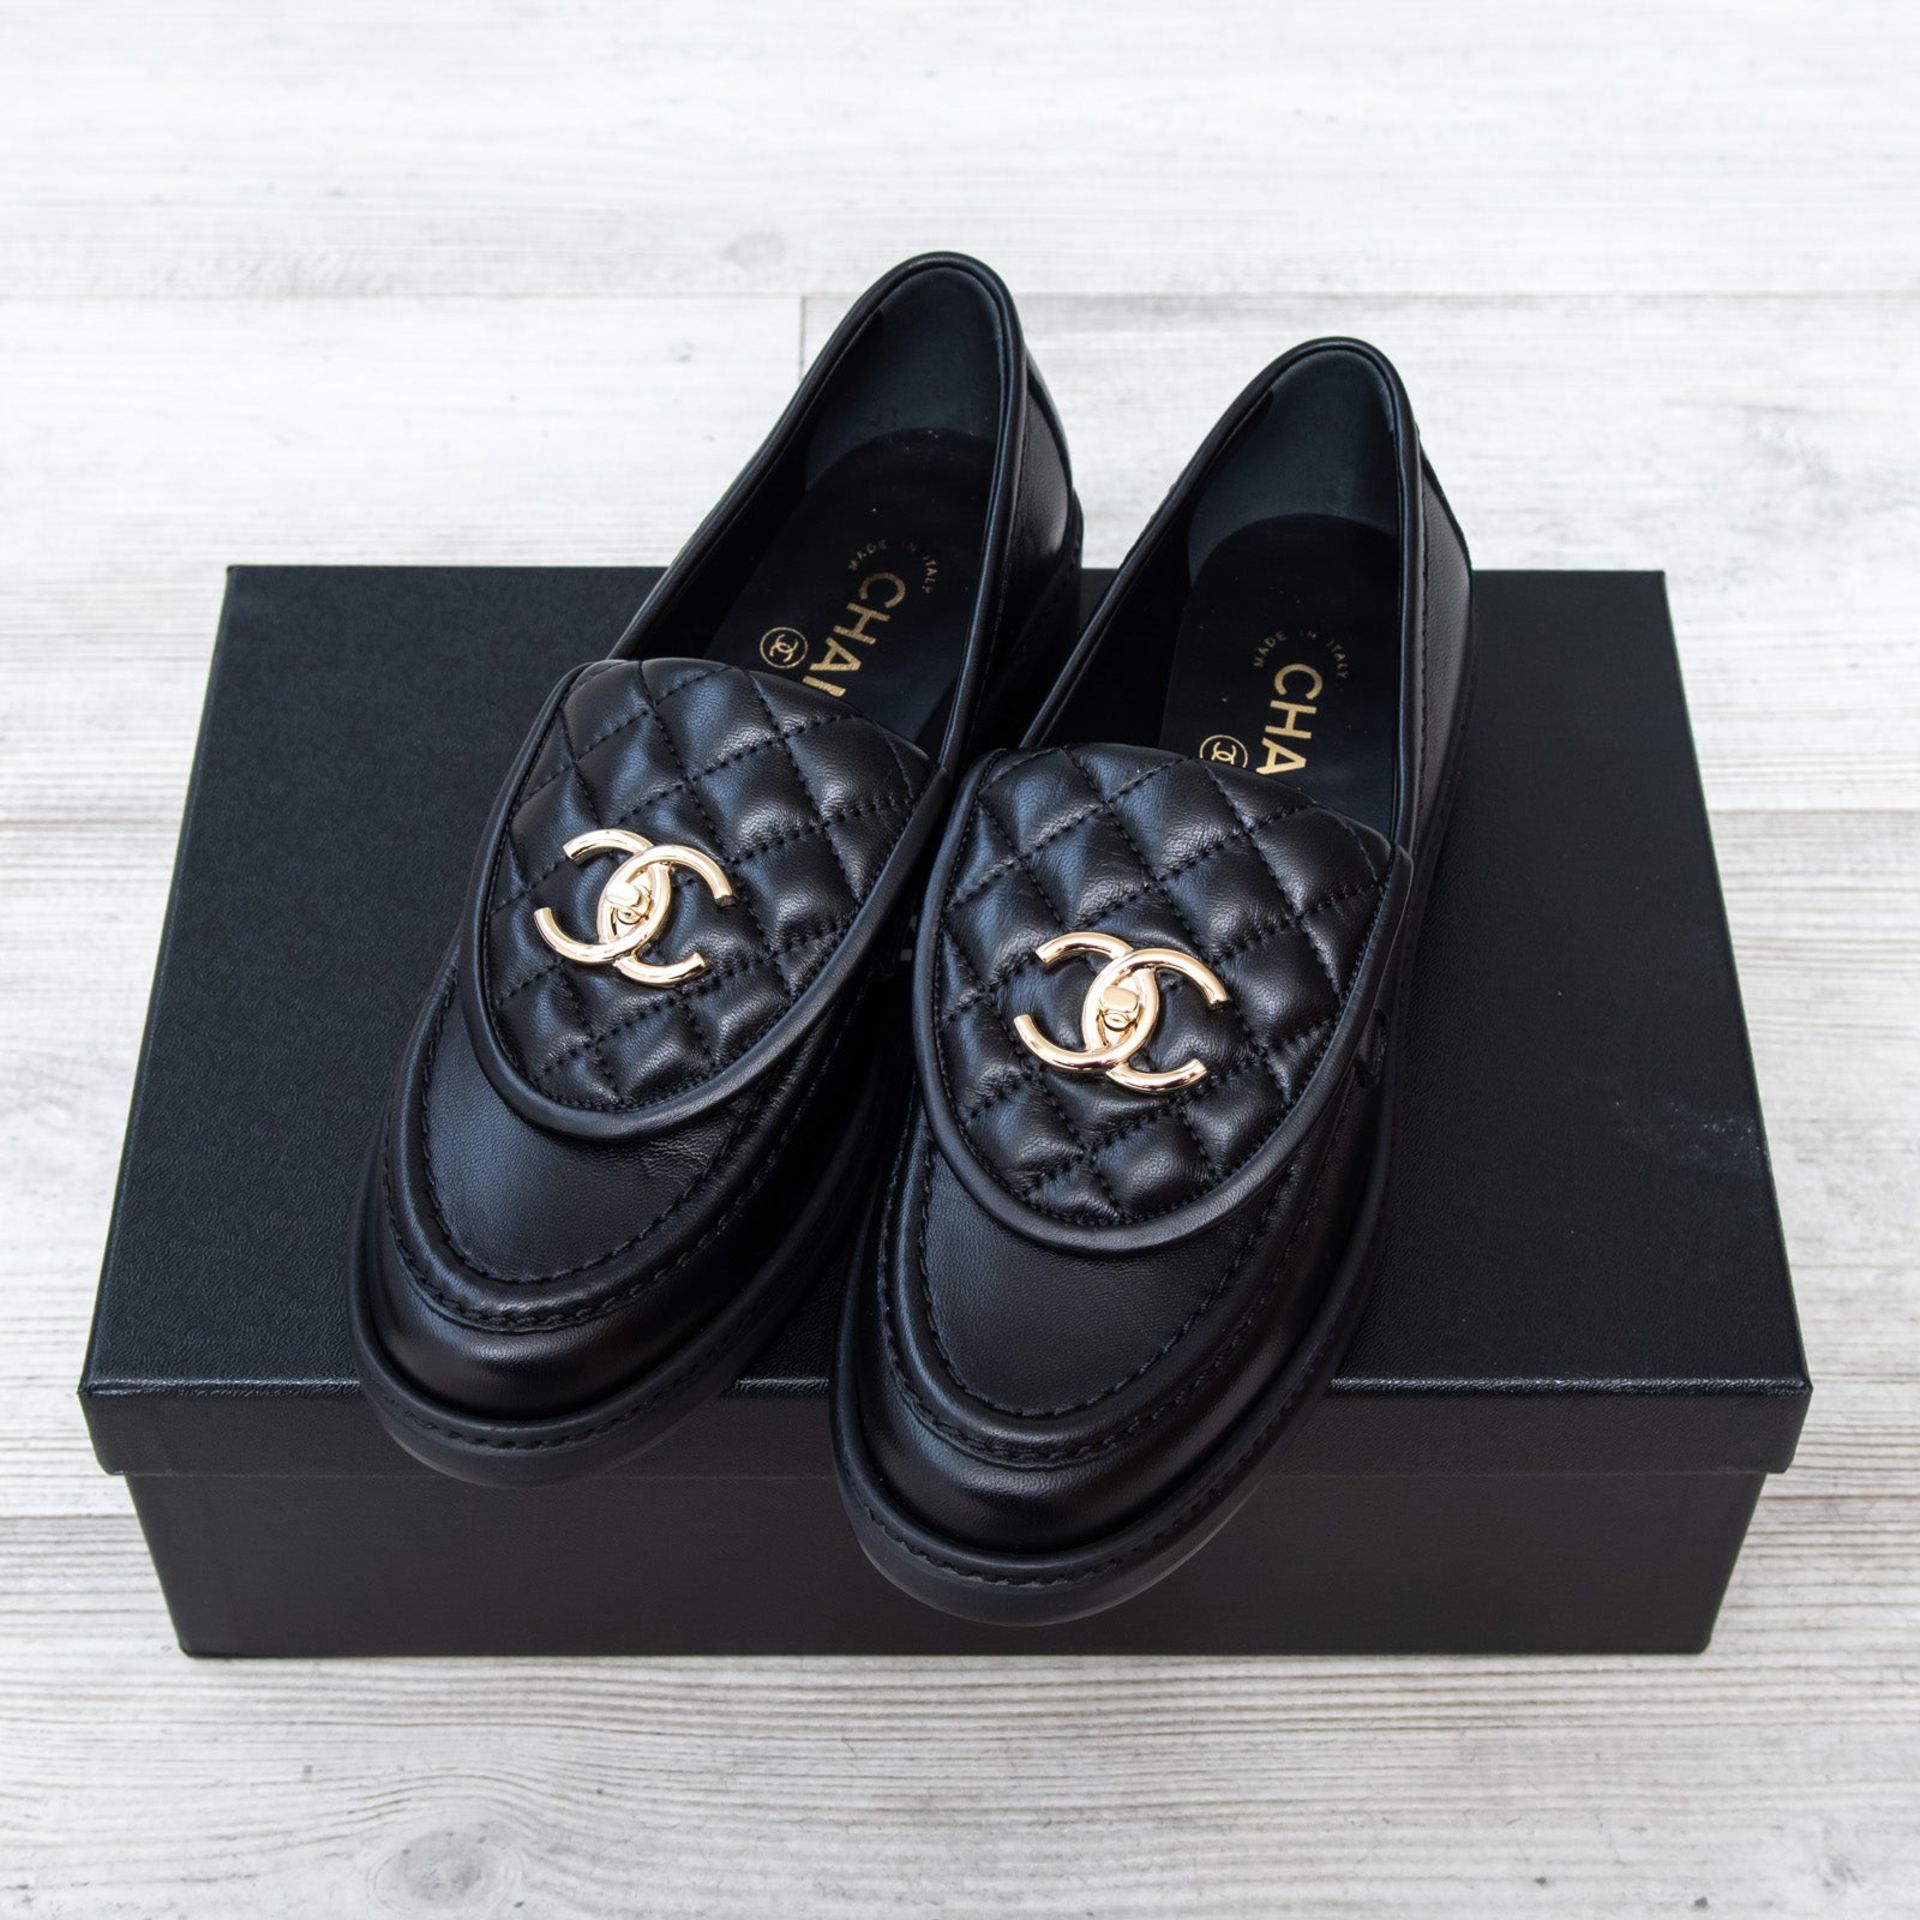 Chanel Black Leather Loafers - Image 2 of 5